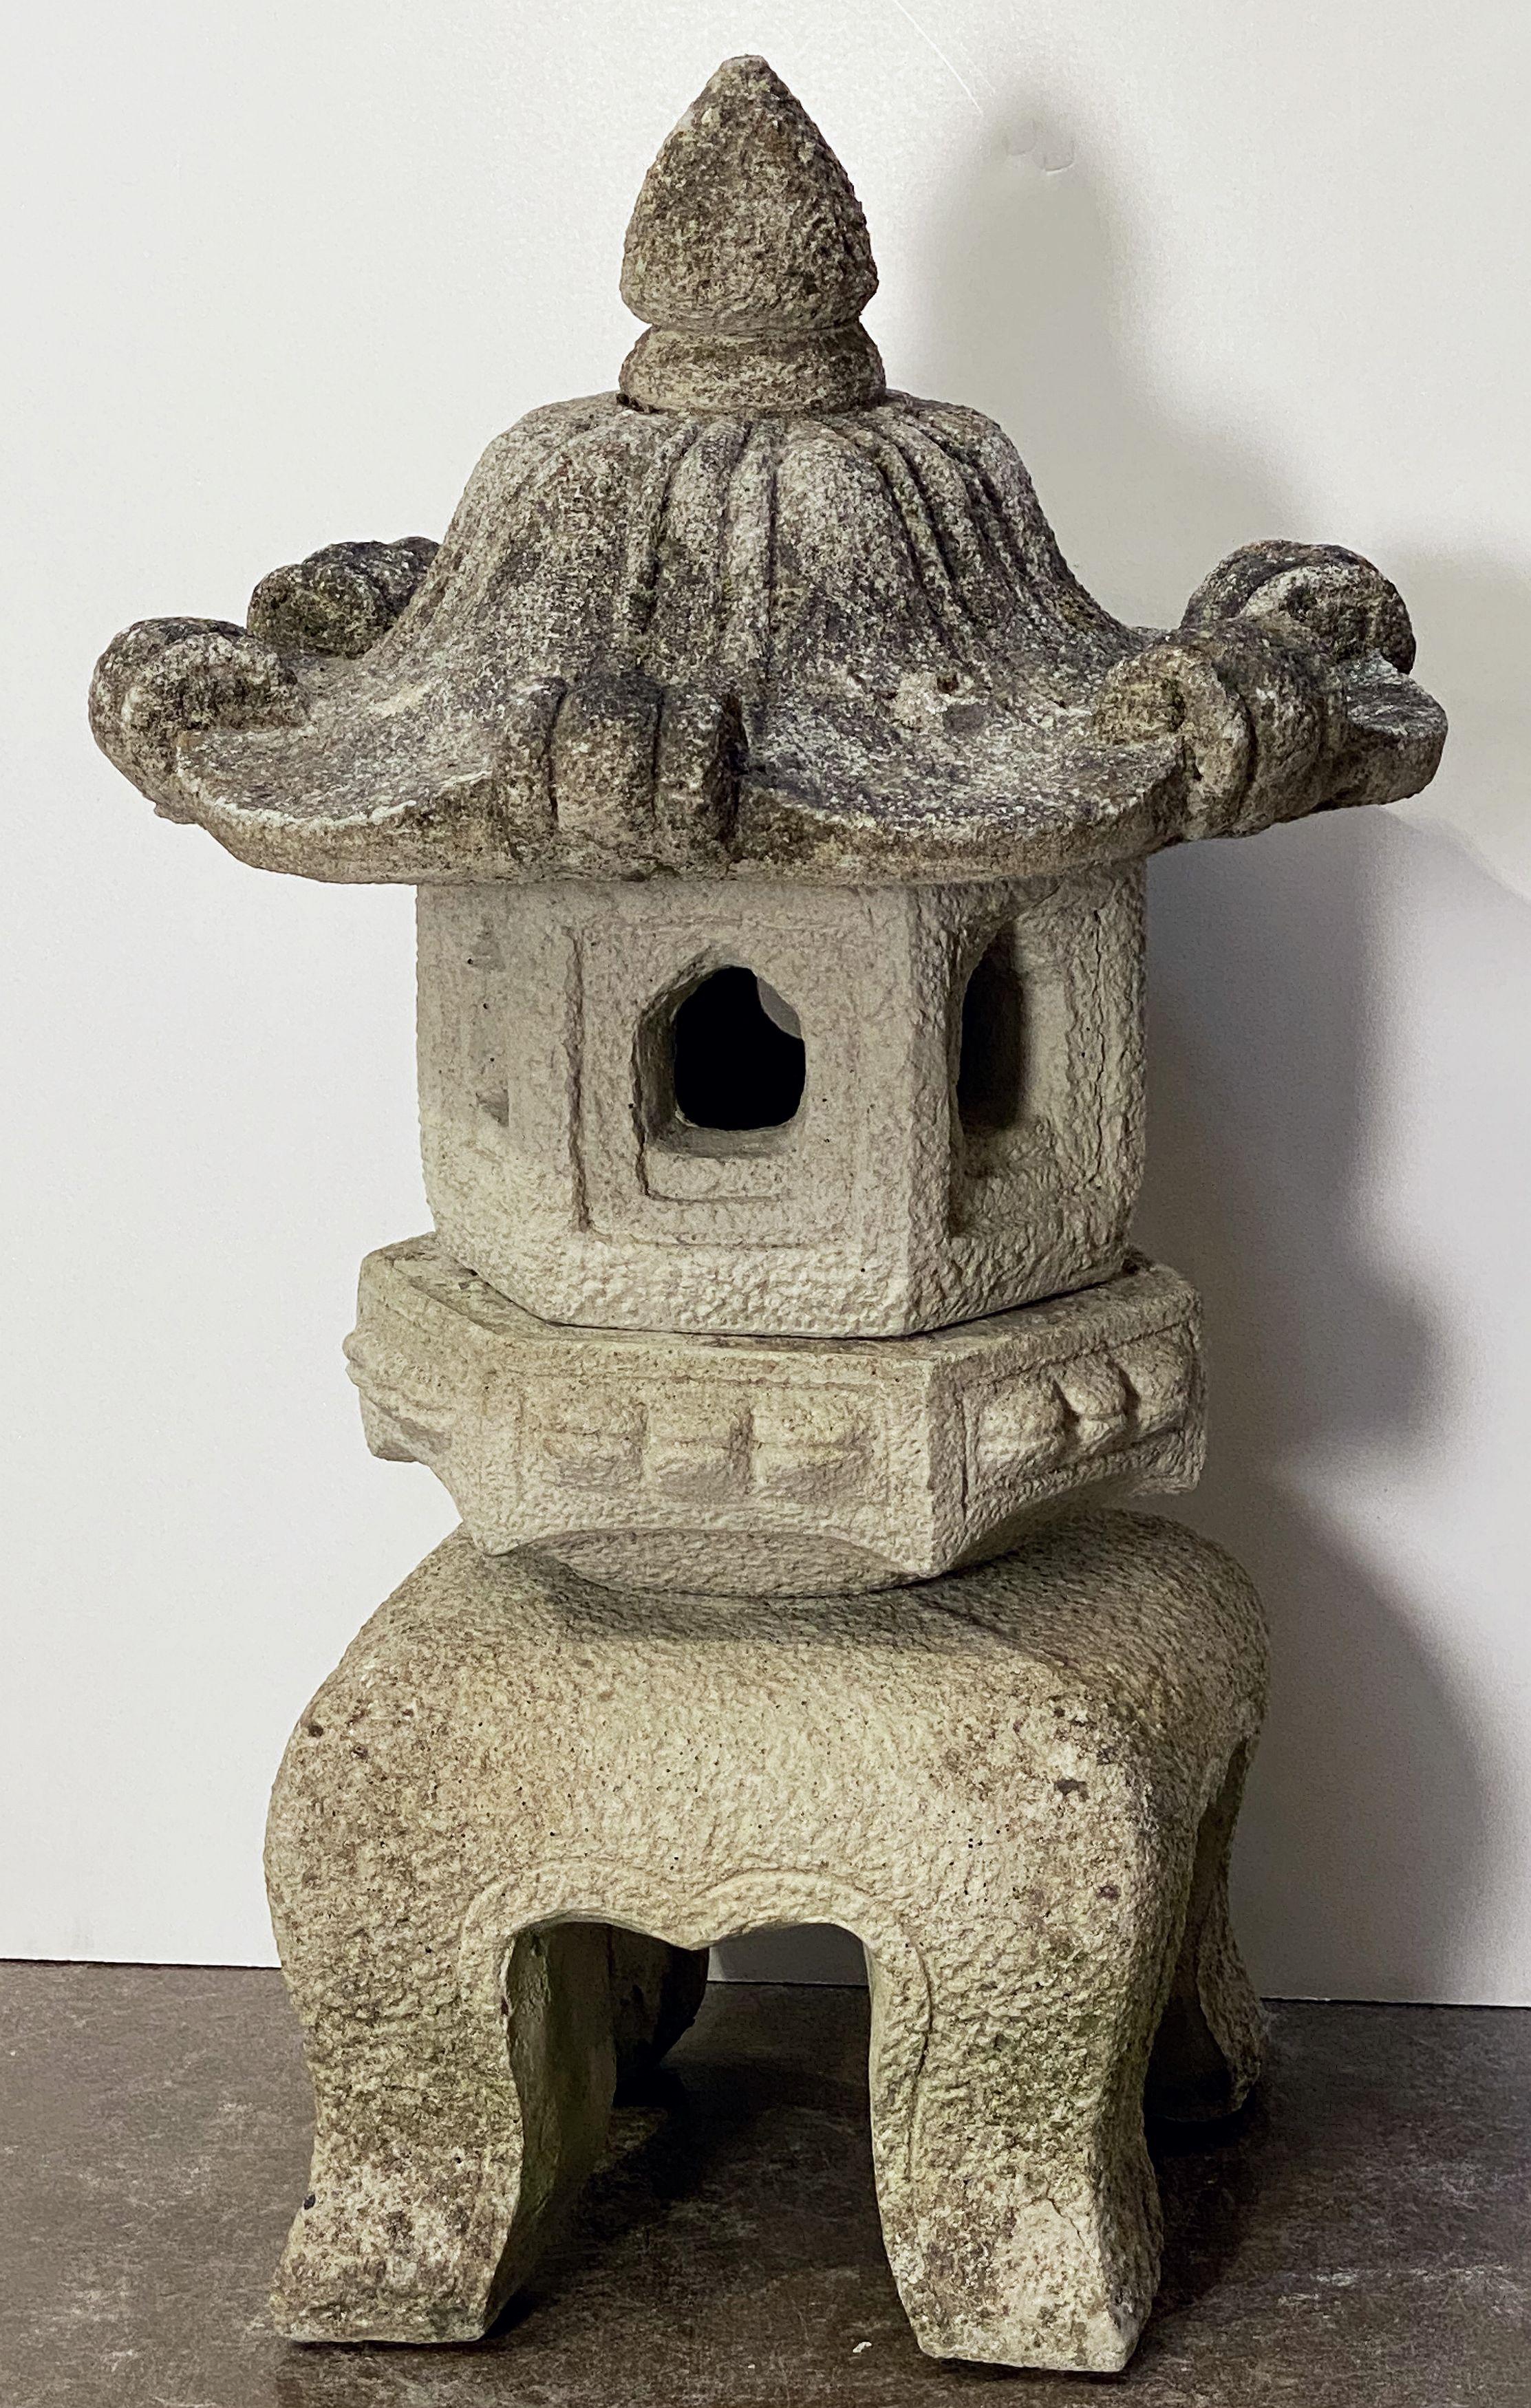 A Kasuga lantern of composition stone, from England, featuring a removable top lid in the shape of a pagoda, and hollowed area (for lighting) in bottom section.

Named for the stylized lanterns at the Kasuga Grand Shrine (Kasuga-taisha), a Shinto